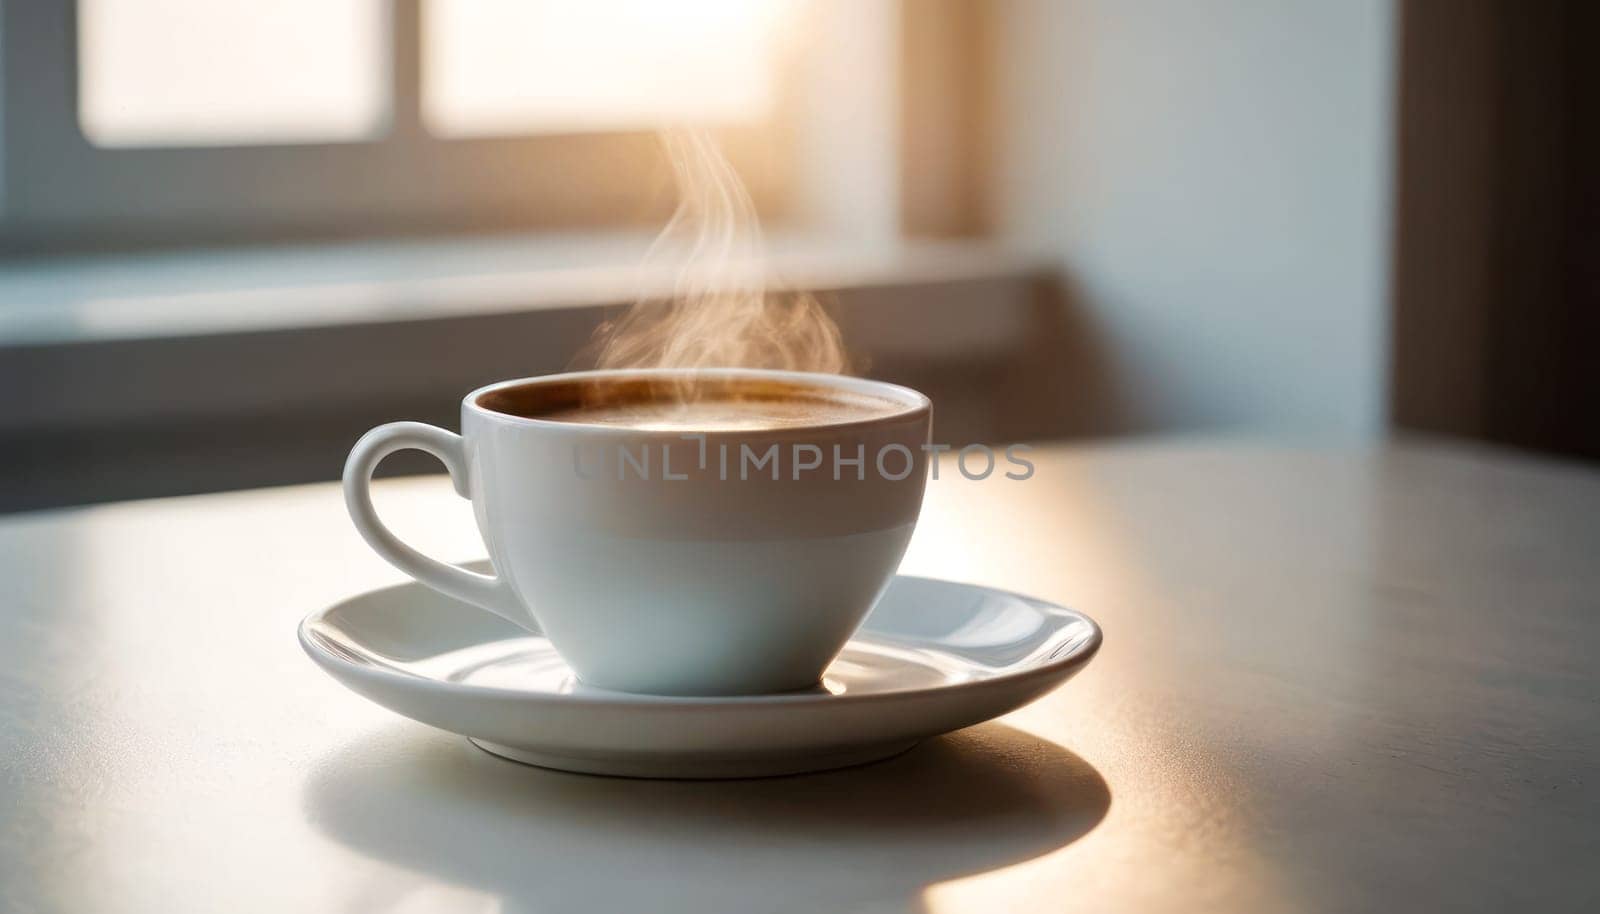 Morning Coffee: A white cup filled with steaming coffee rests on a clean white table, casting a subtle shadow. creating a serene morning scene